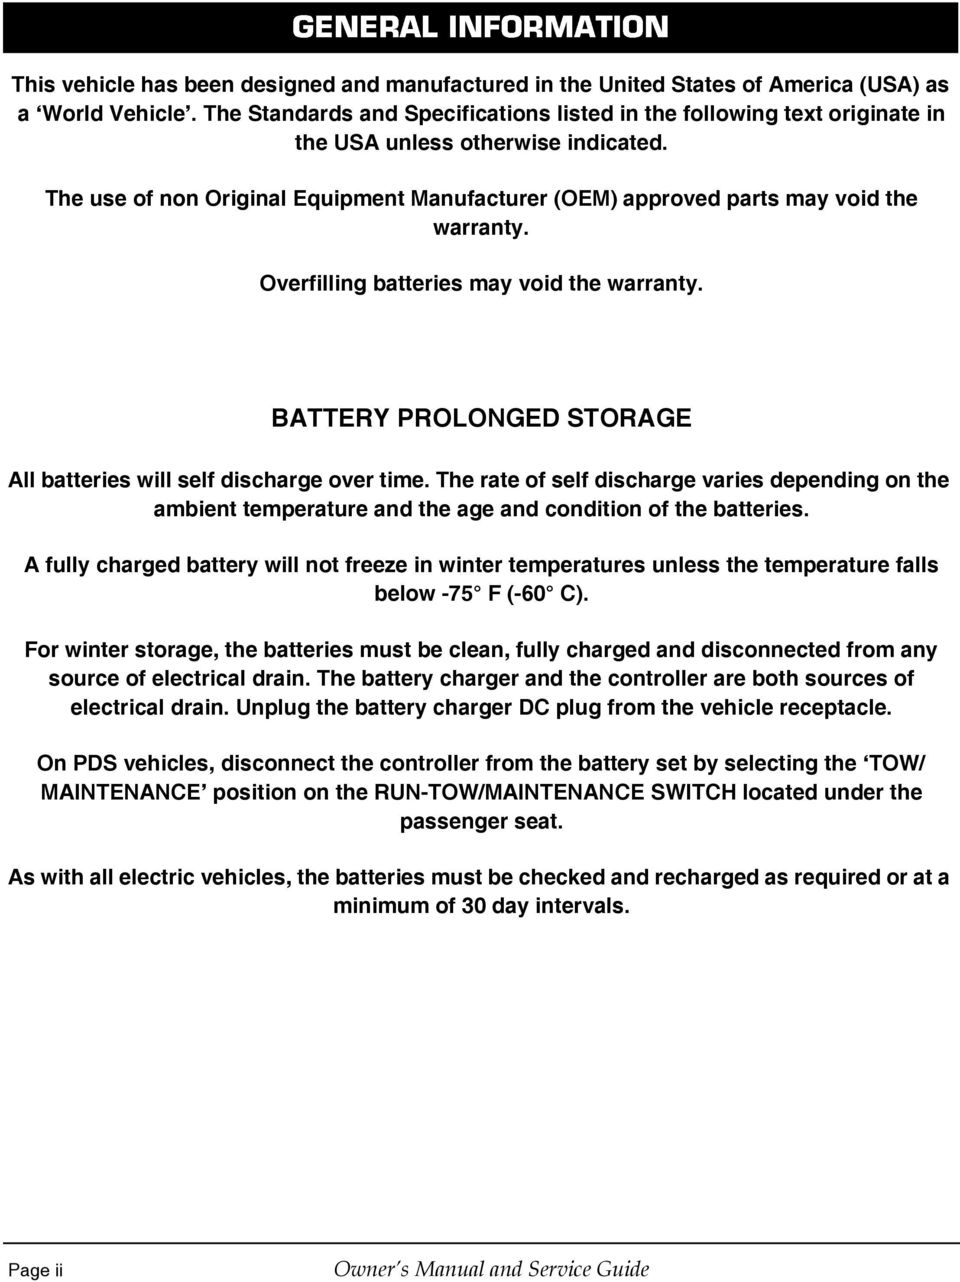 The use of non Original Equipment Manufacturer (OEM) approved parts may void the warranty. Overfilling batteries may void the warranty.